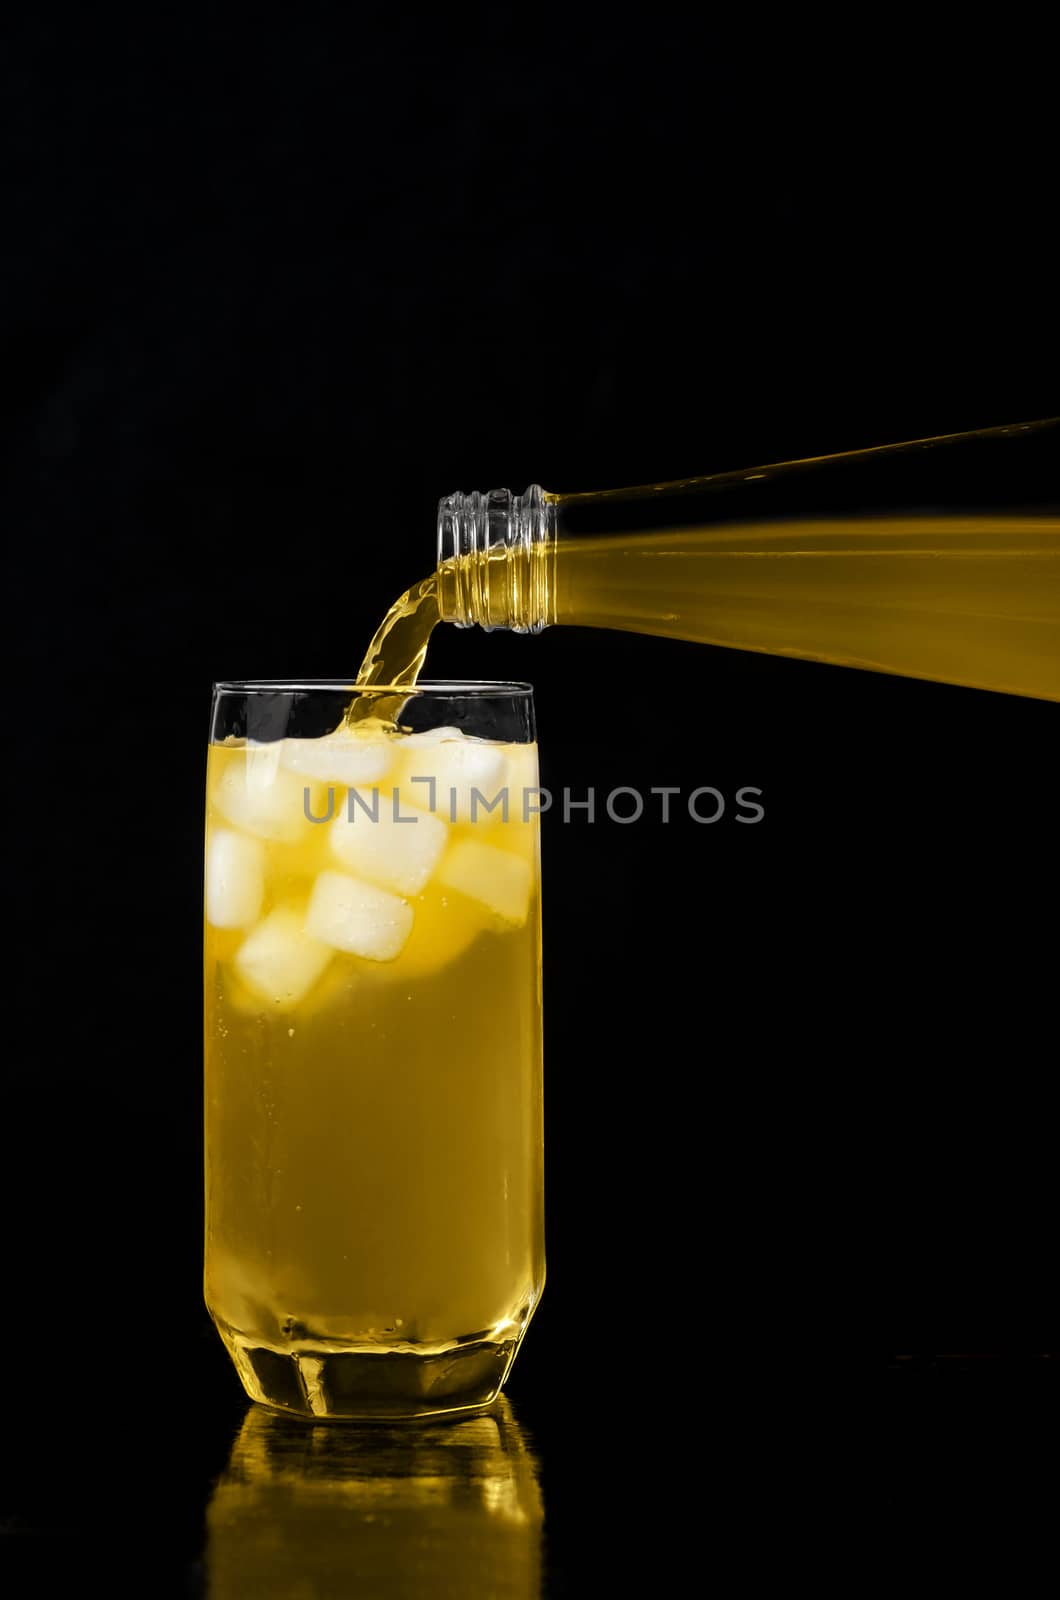 Lemonade is poured into the glass, on a black background by Gaina